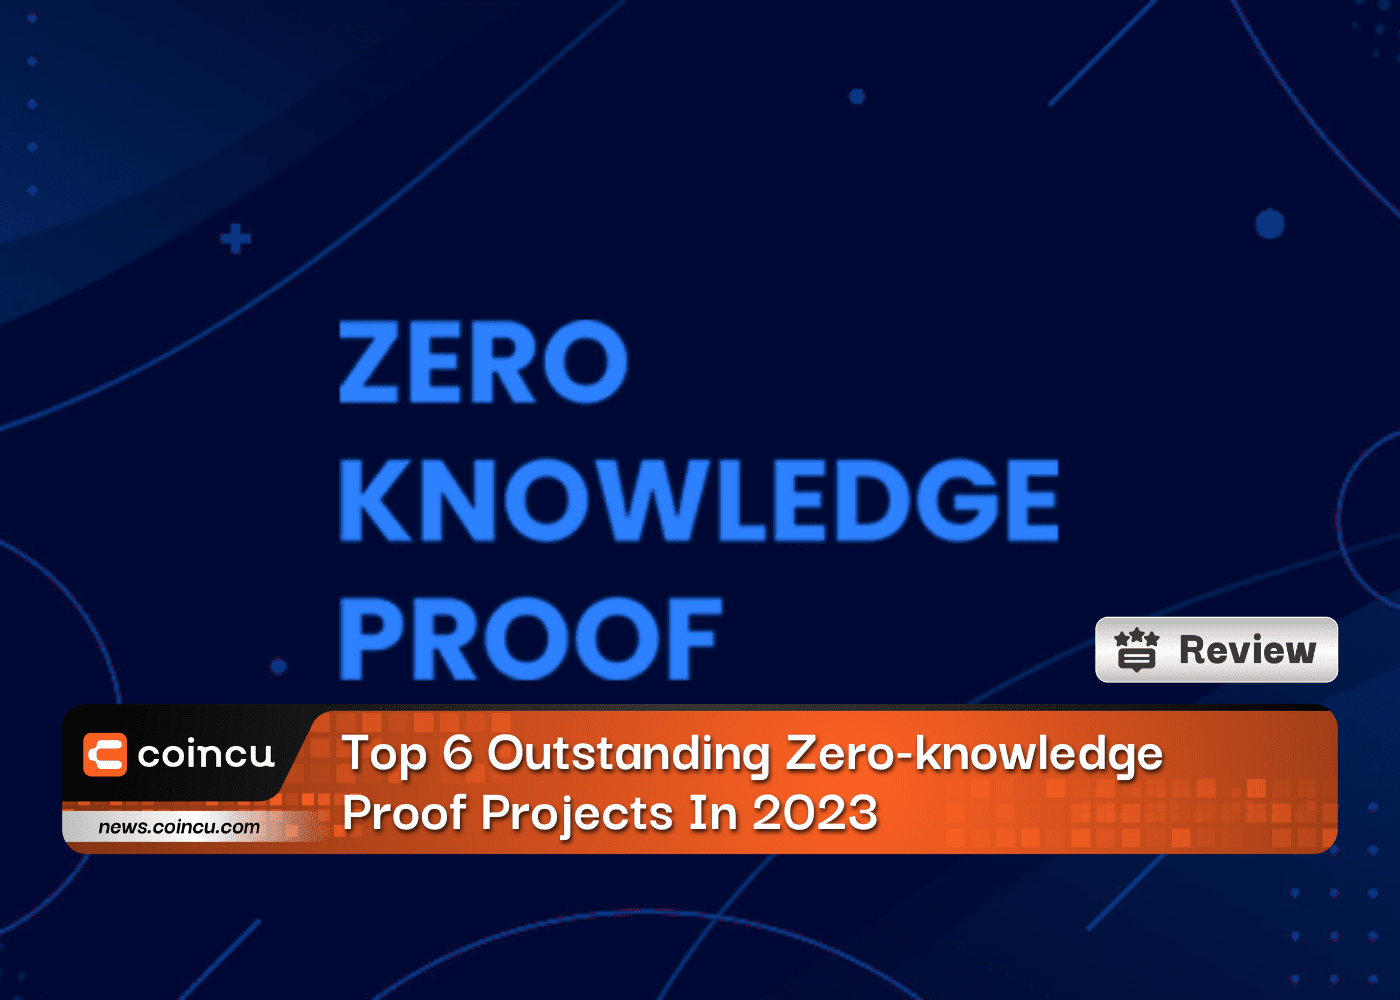 Top 6 Outstanding Zero-knowledge Proof Projects In 2023